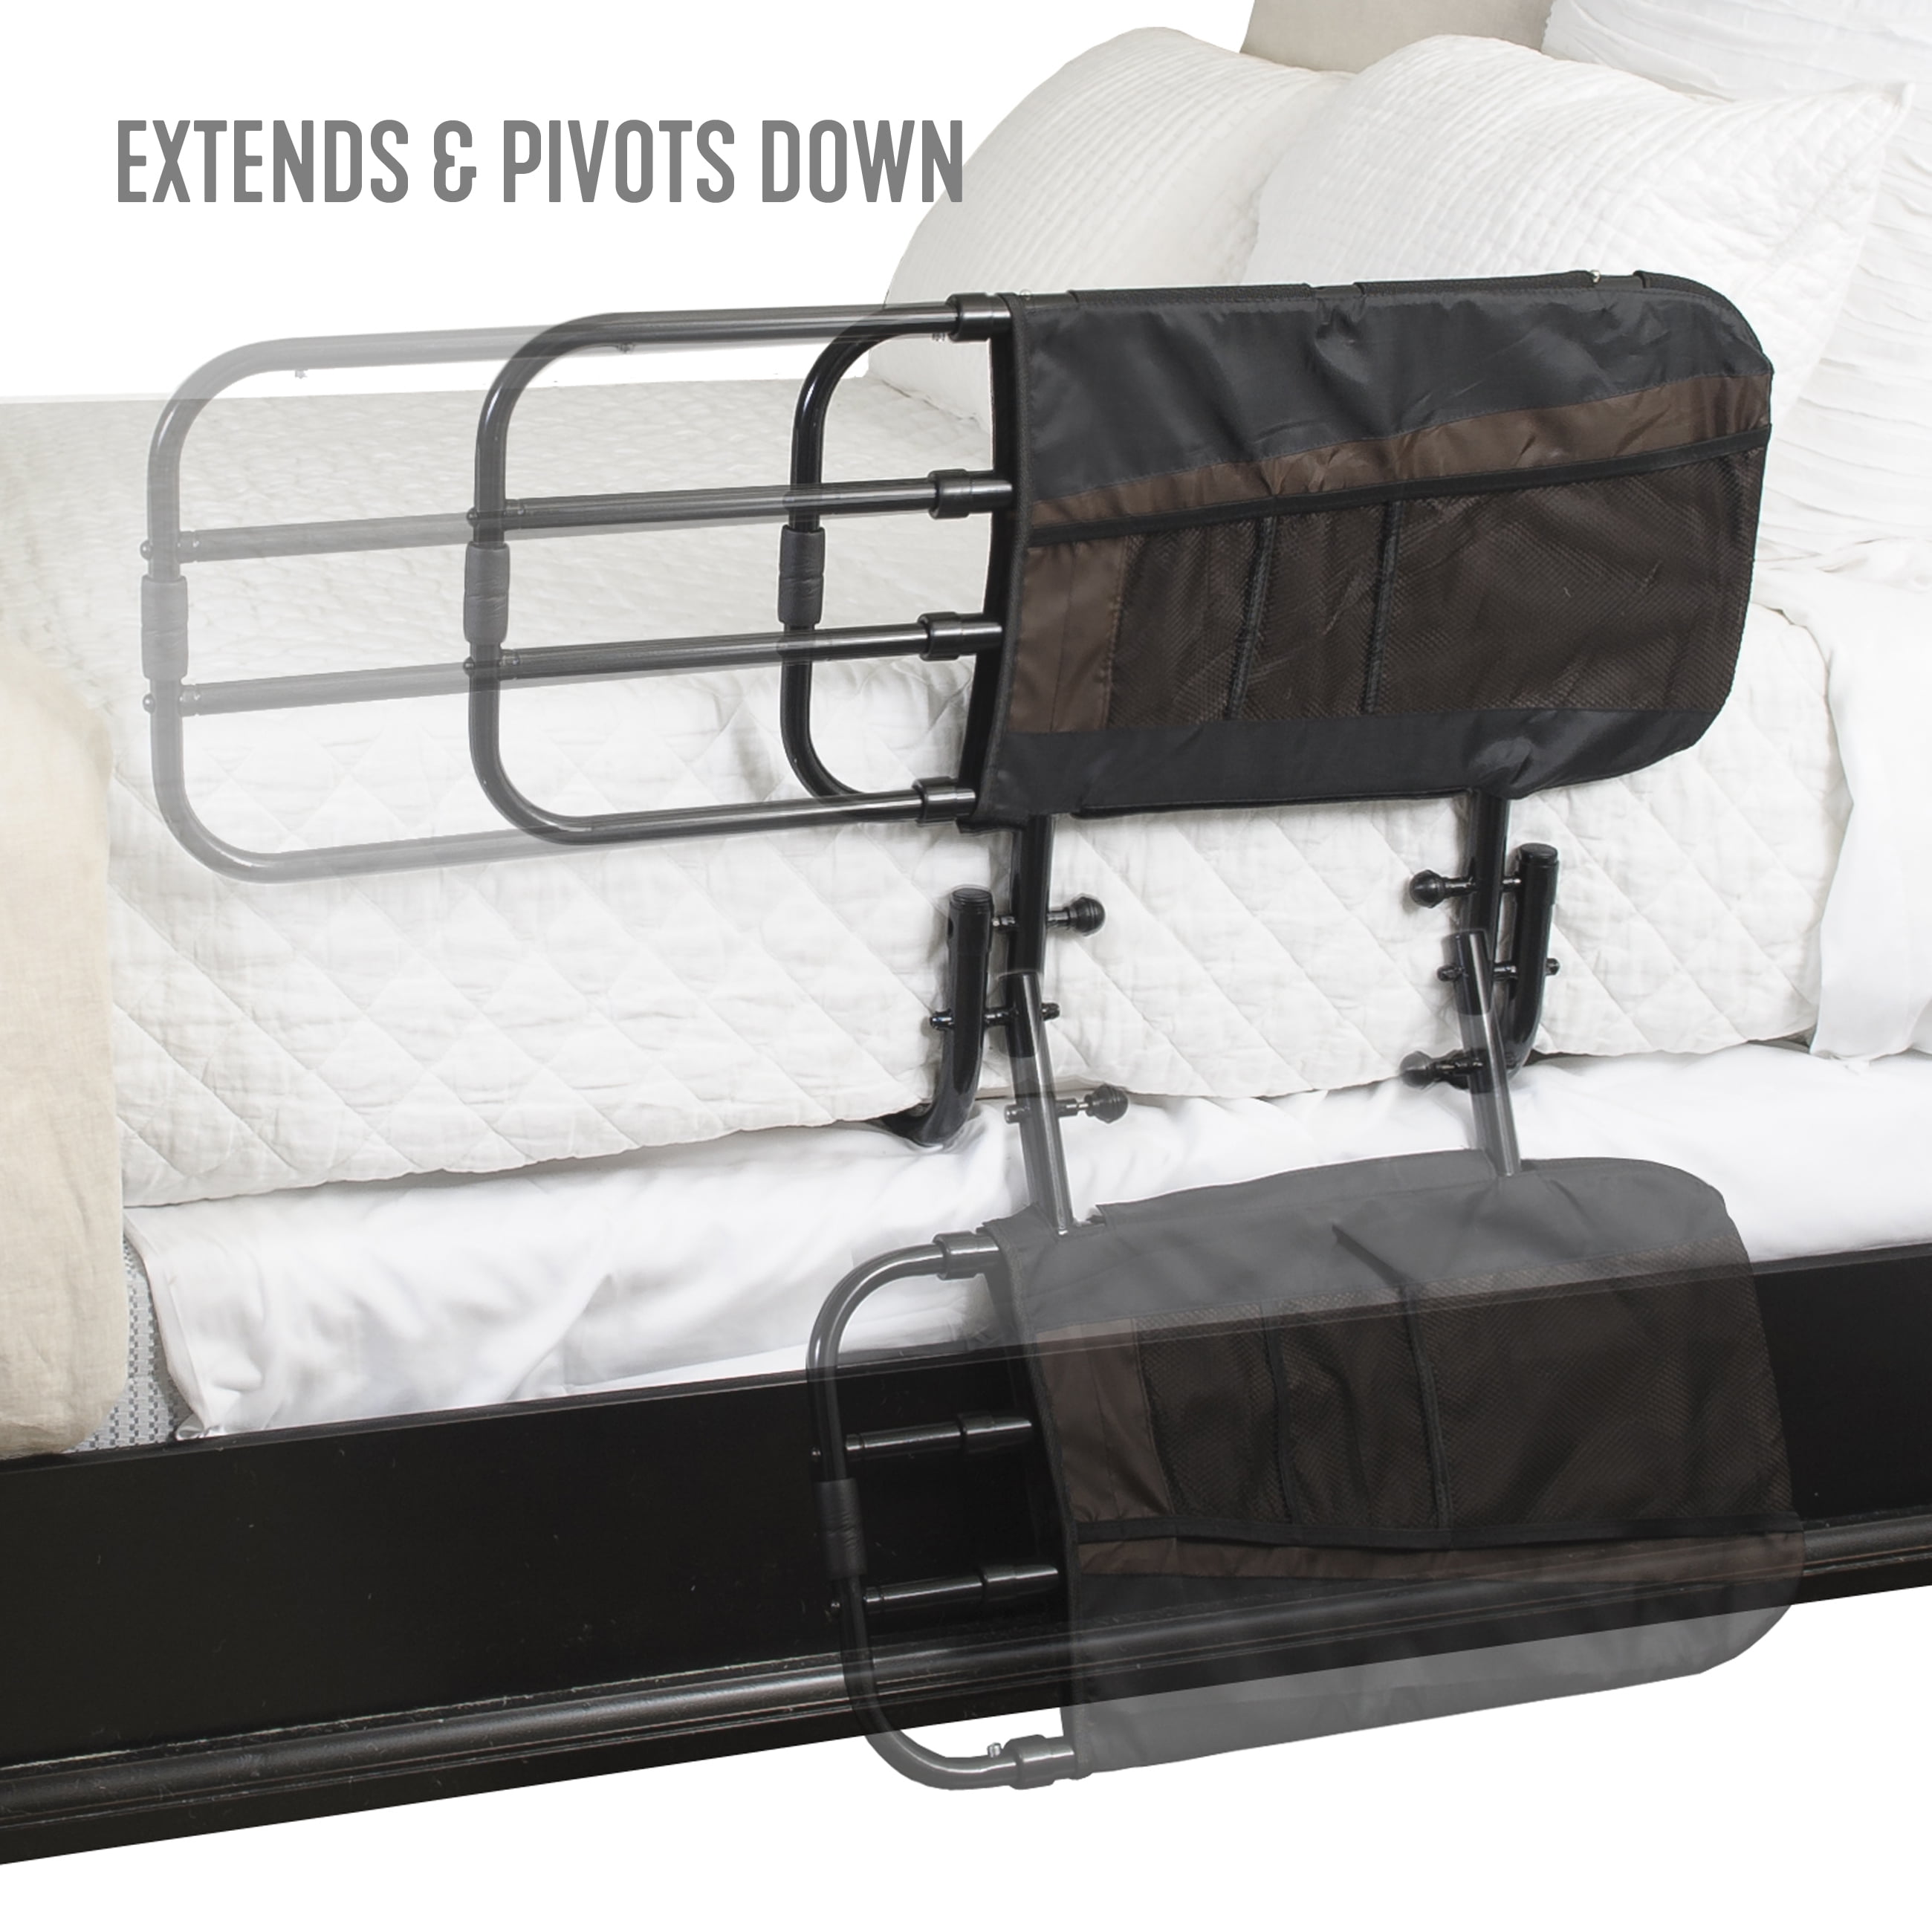 The Rotoflex - Adjustable beds, rotating beds, care beds and the leg lifter